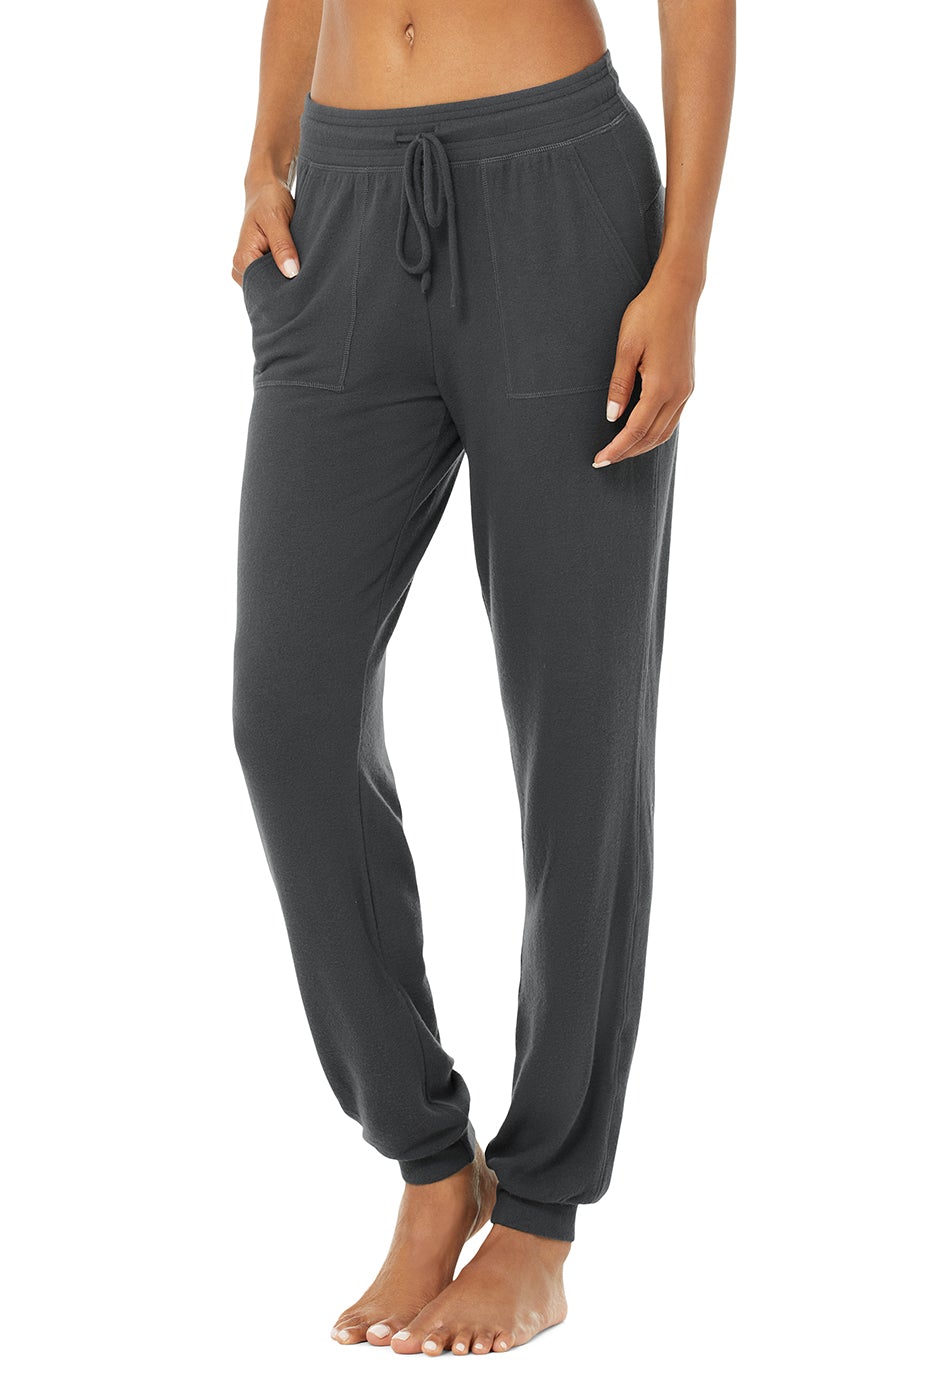 Alo muse sweatpants  Shape Up With Shelly Vinyard